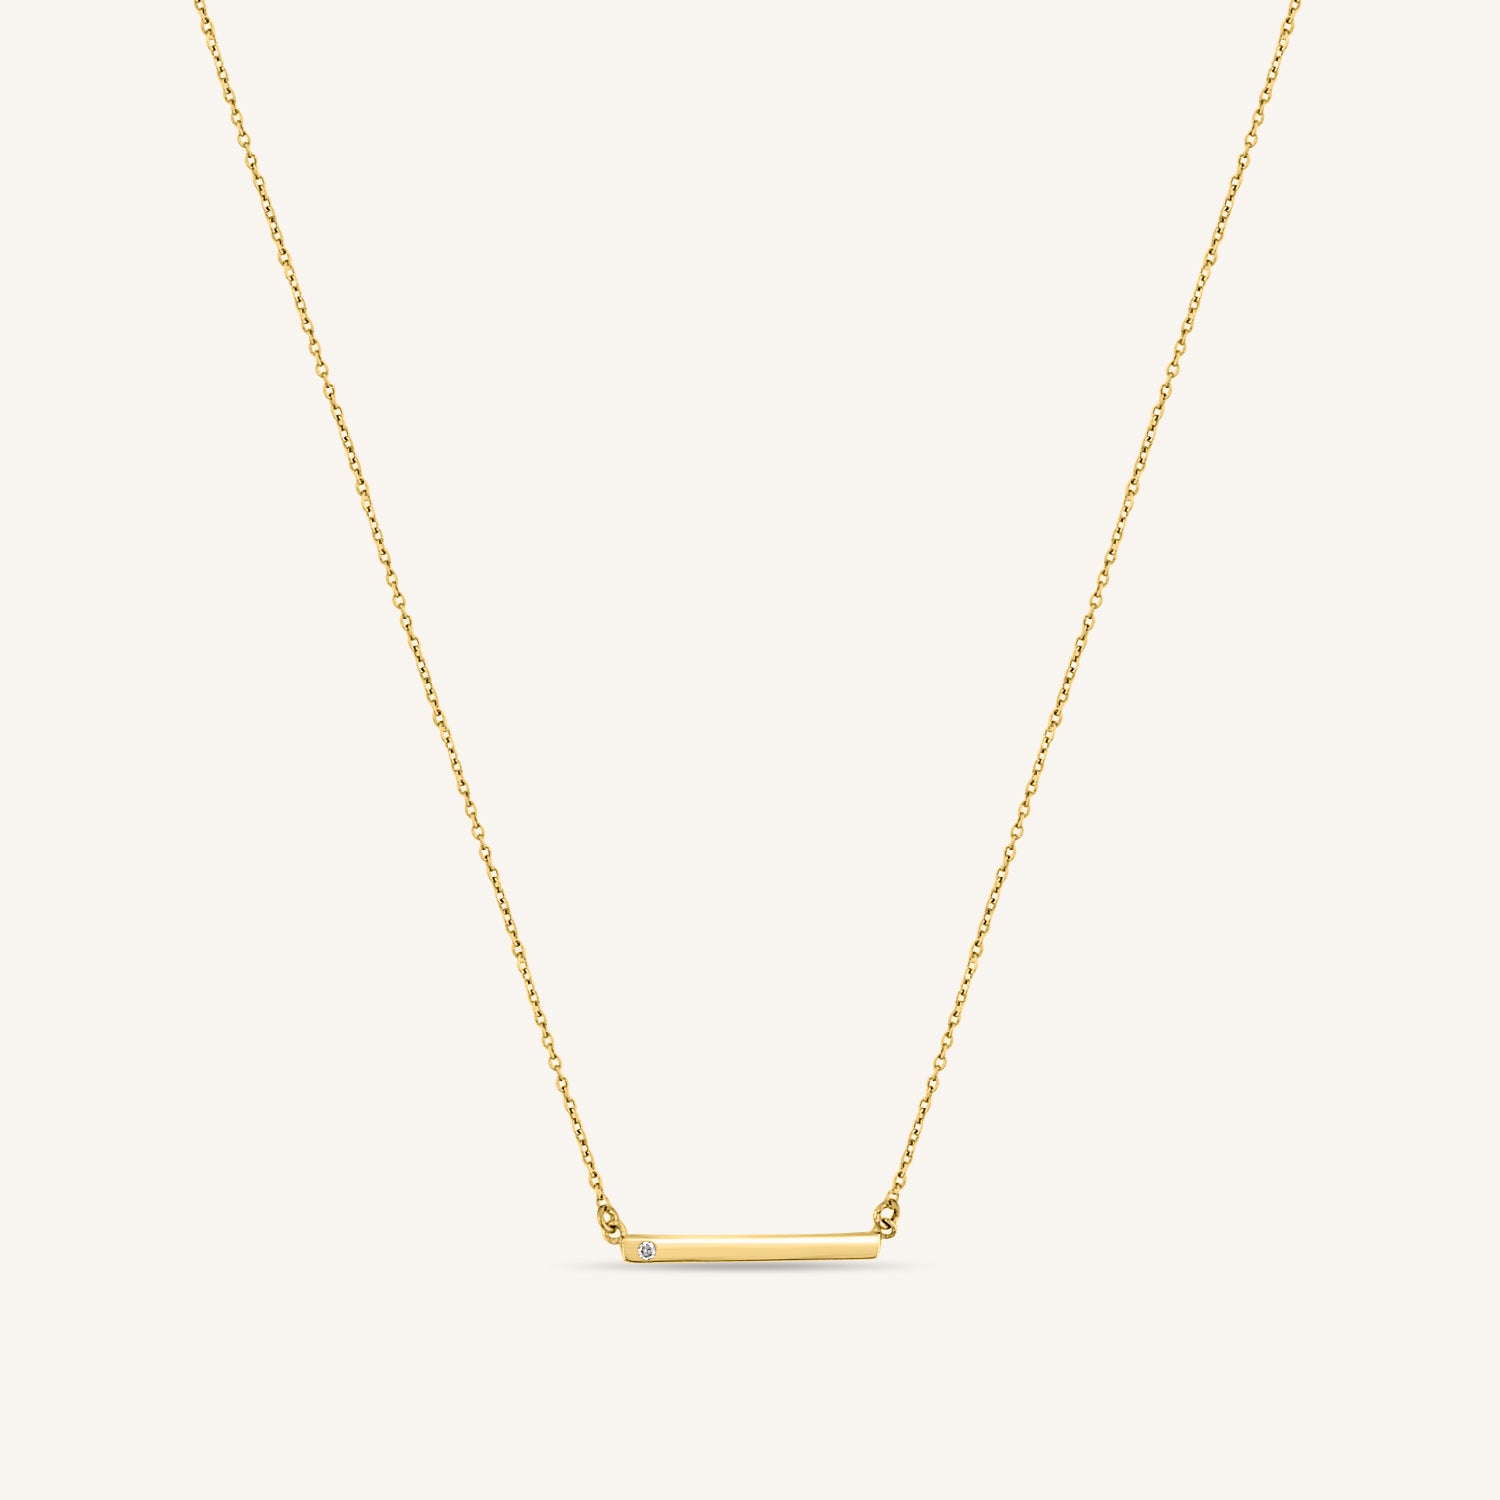 Necklaces For Women - Summer Free Size Esther Adorned